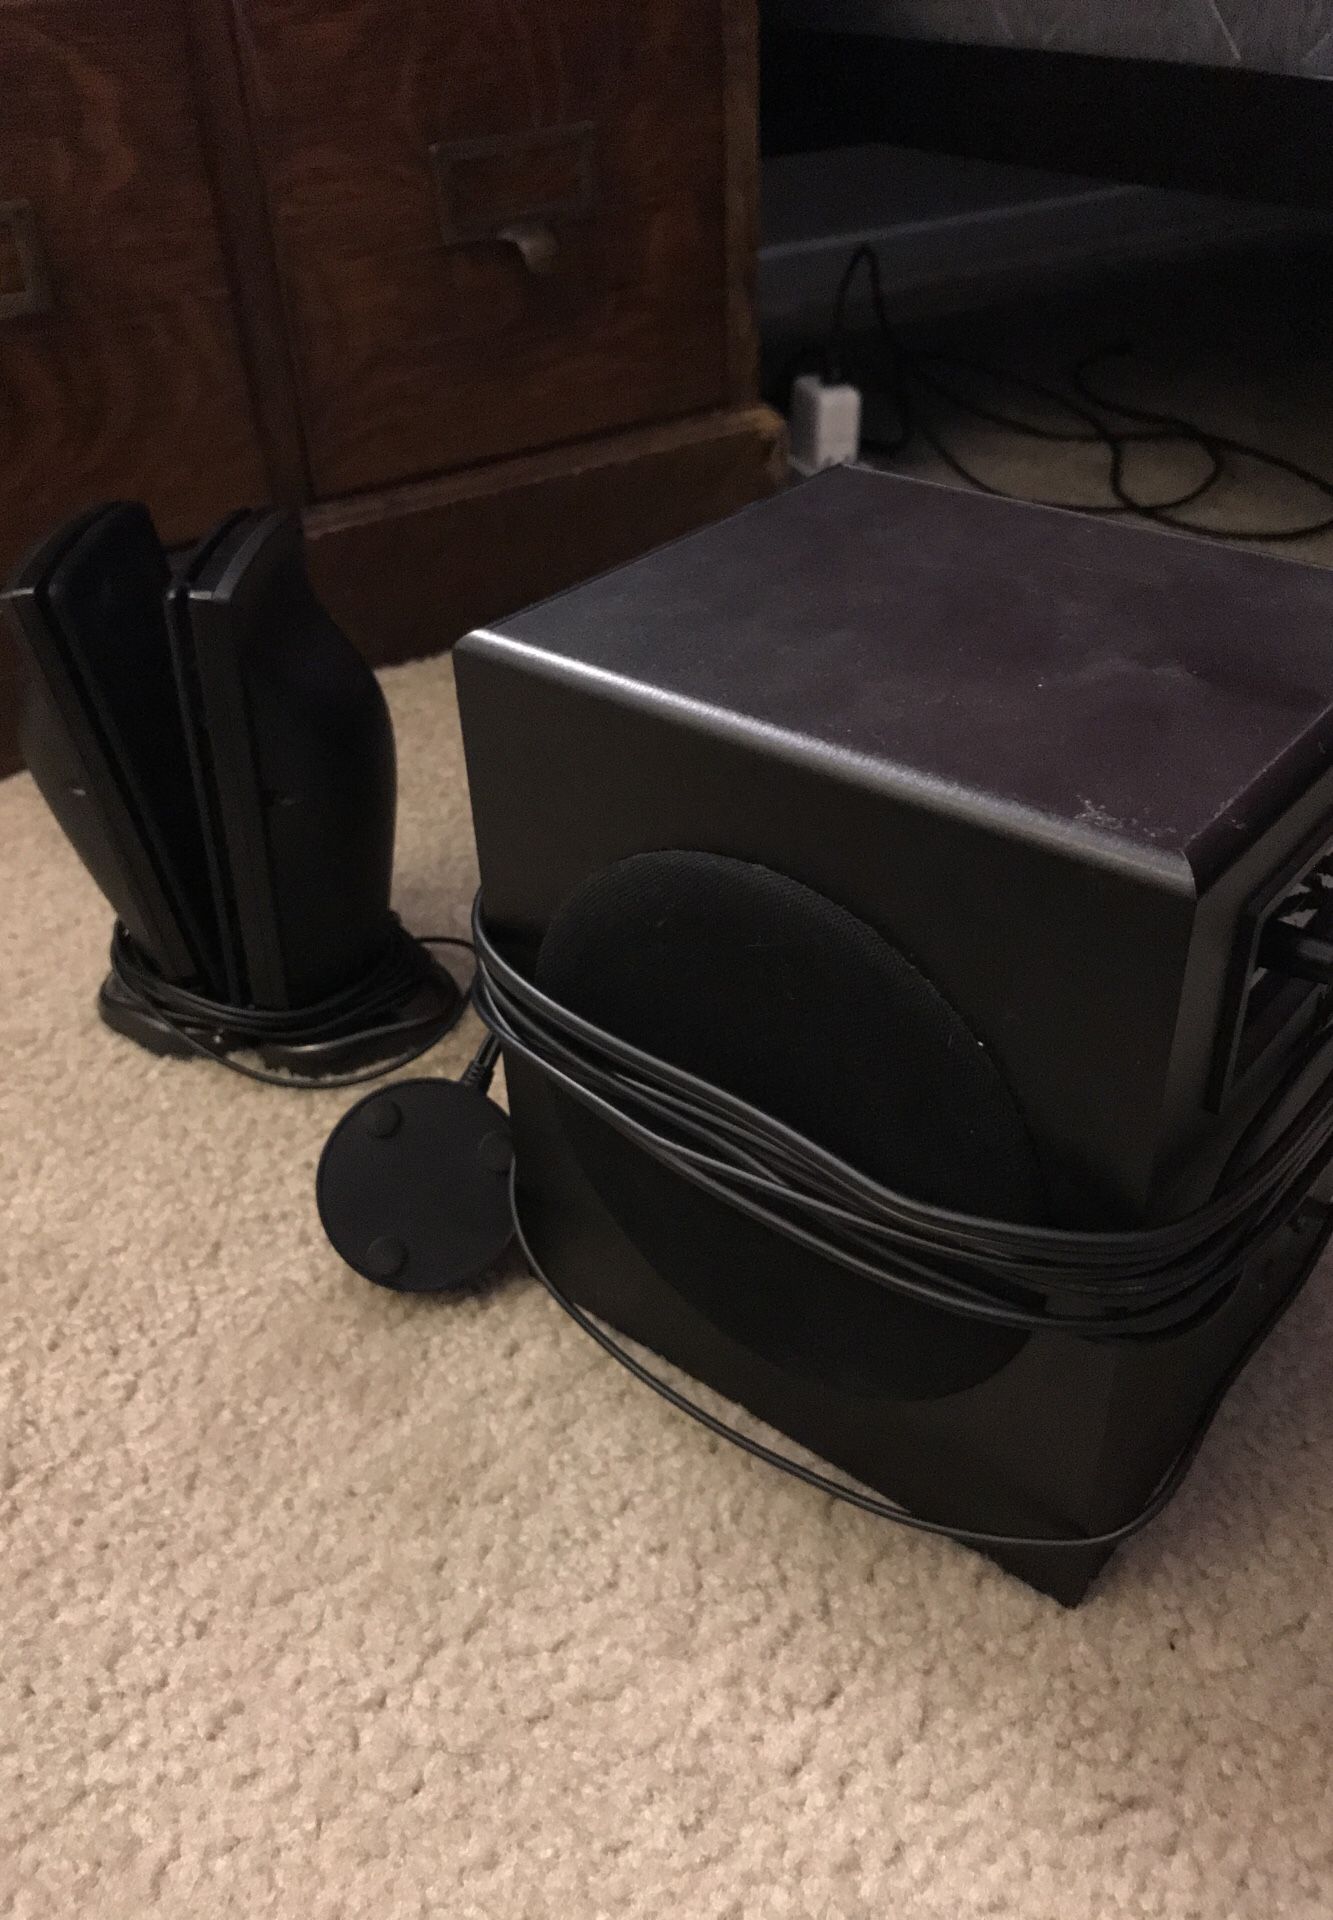 Gigaware subwoofer and speakers